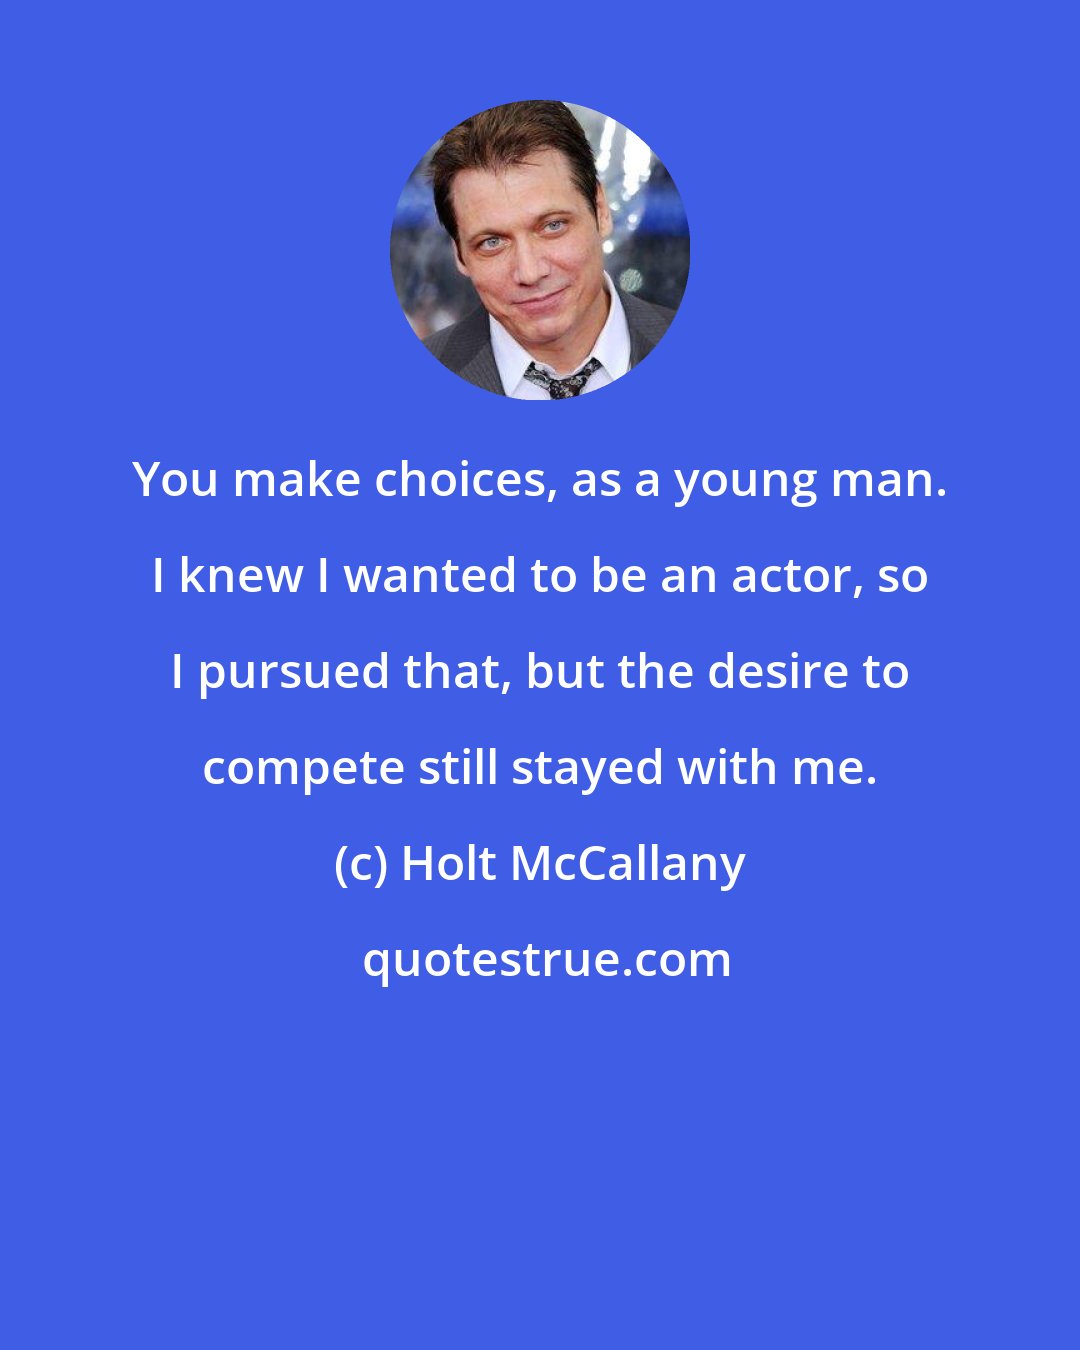 Holt McCallany: You make choices, as a young man. I knew I wanted to be an actor, so I pursued that, but the desire to compete still stayed with me.